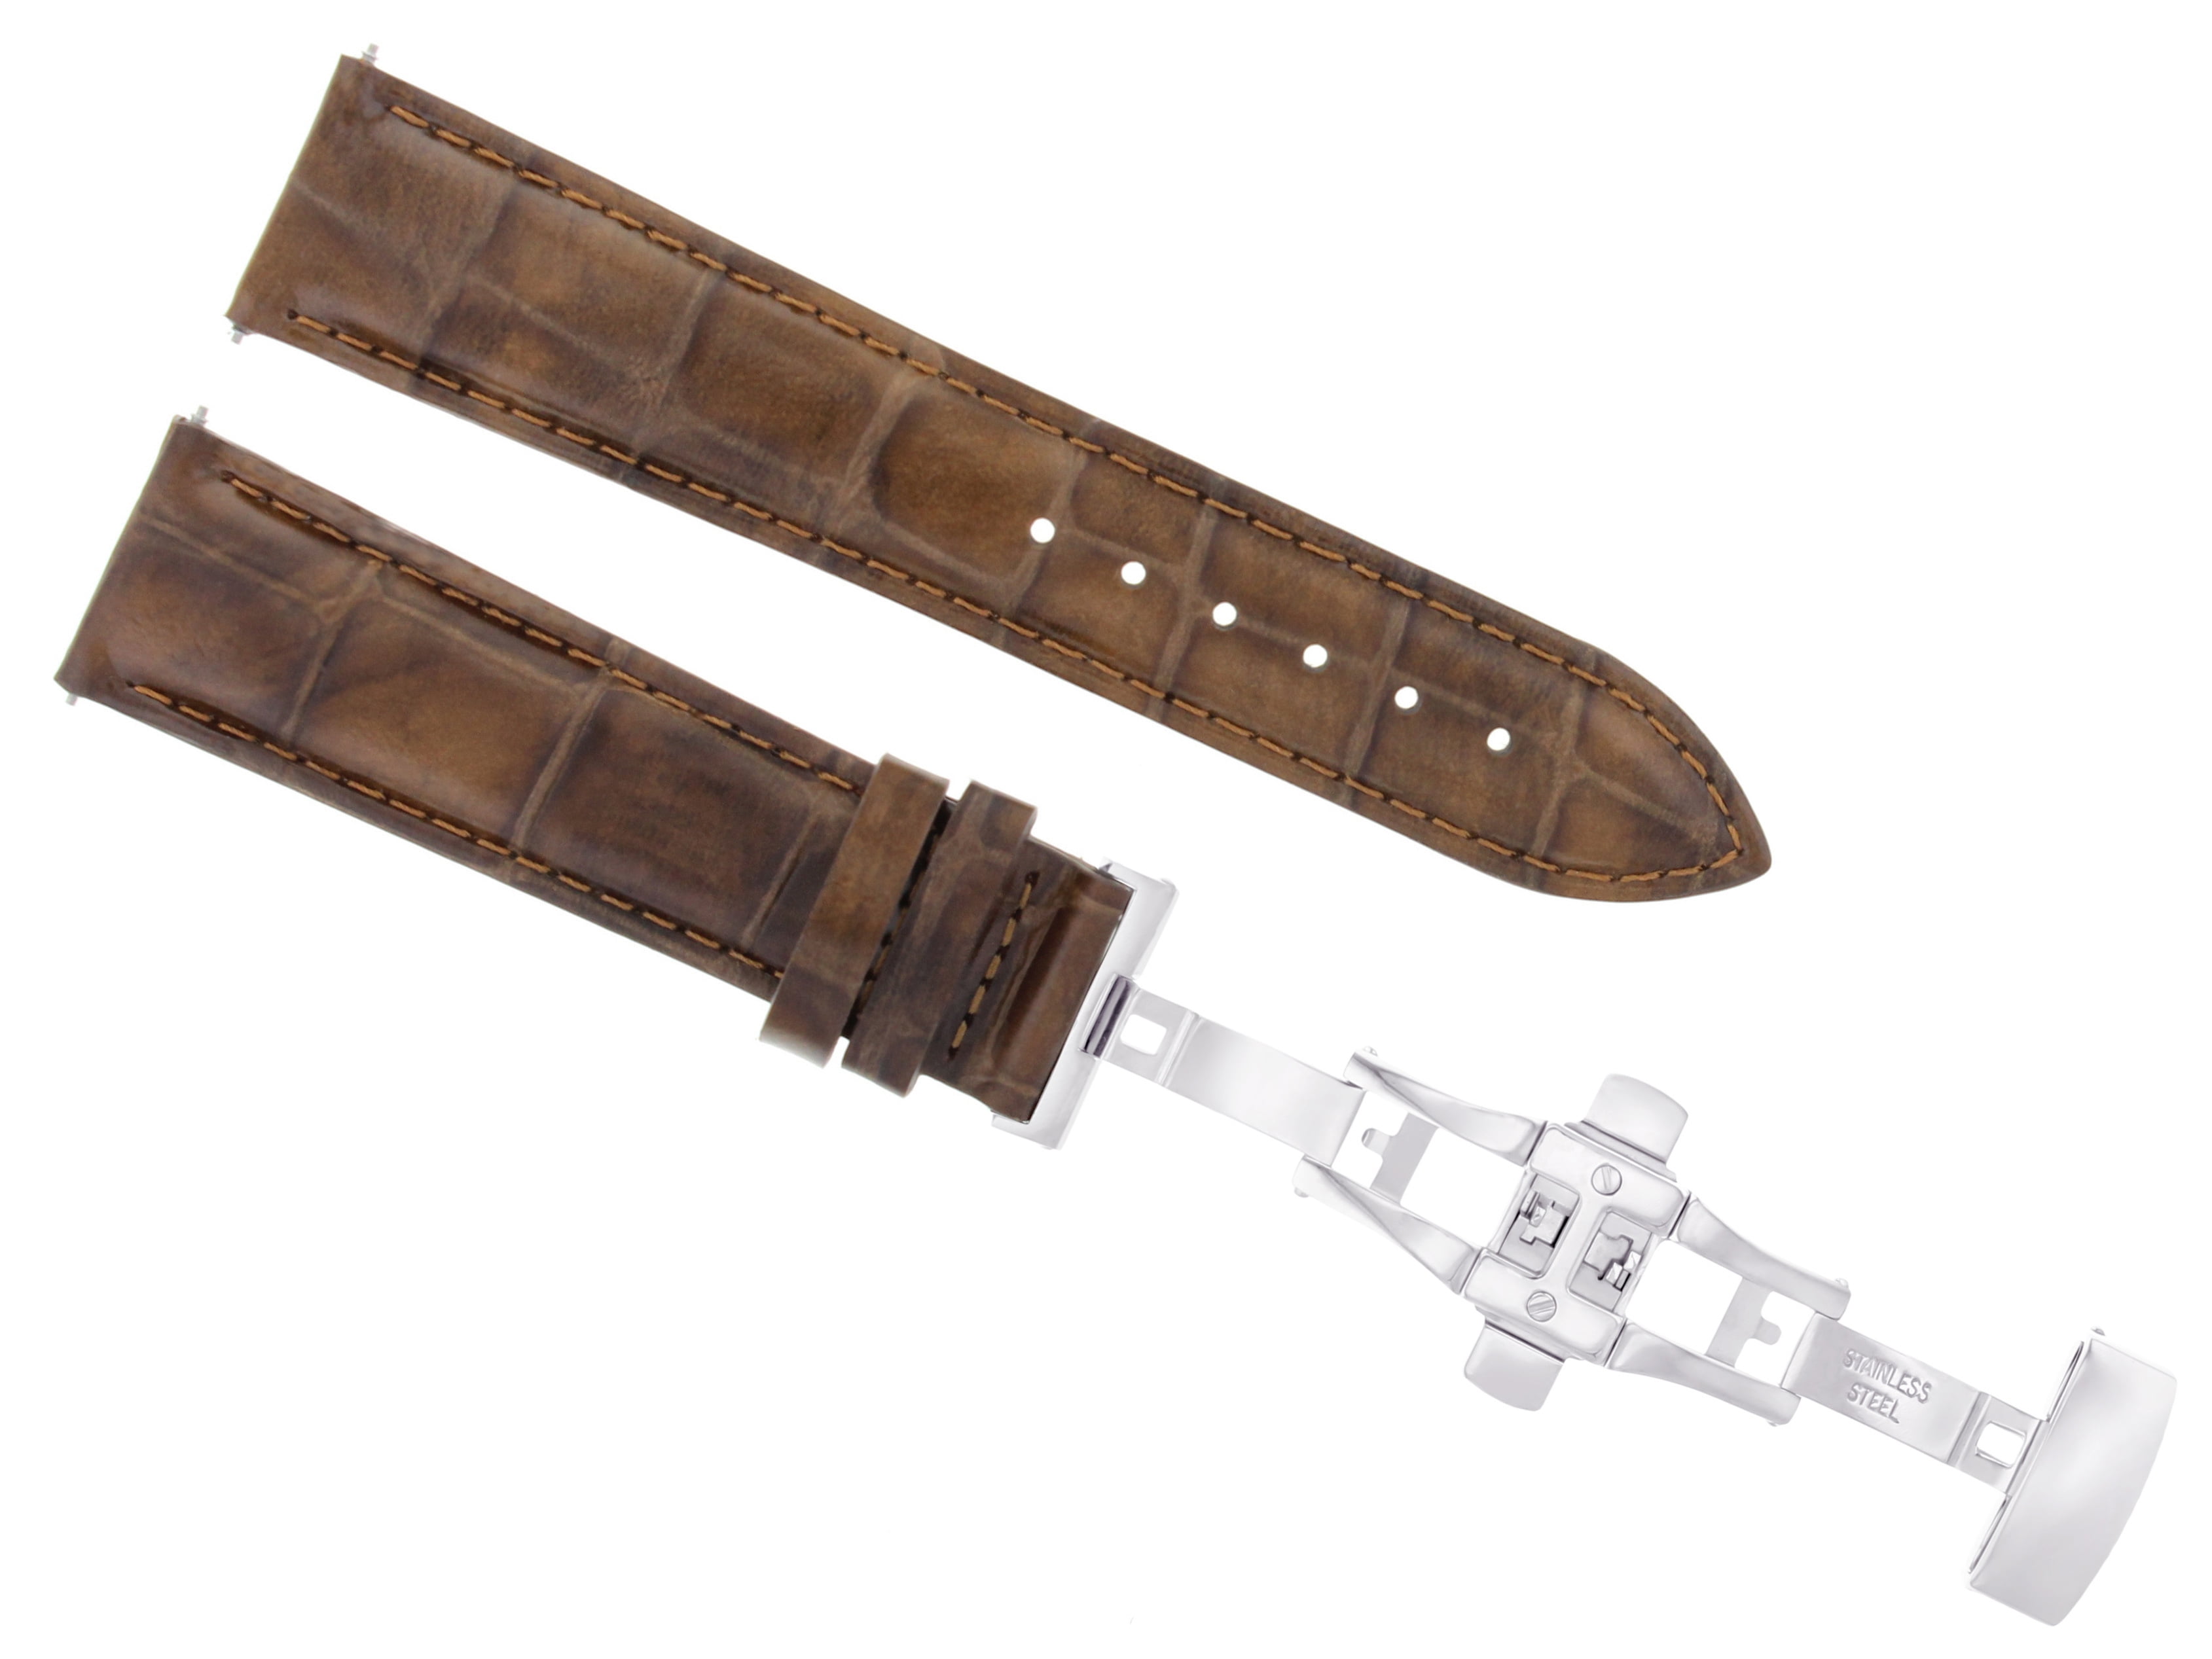 20MM LEATHER WATCH STRAP BAND FOR SEIKO 5 SARG005, SARG007, SARB017 L/BROWN  